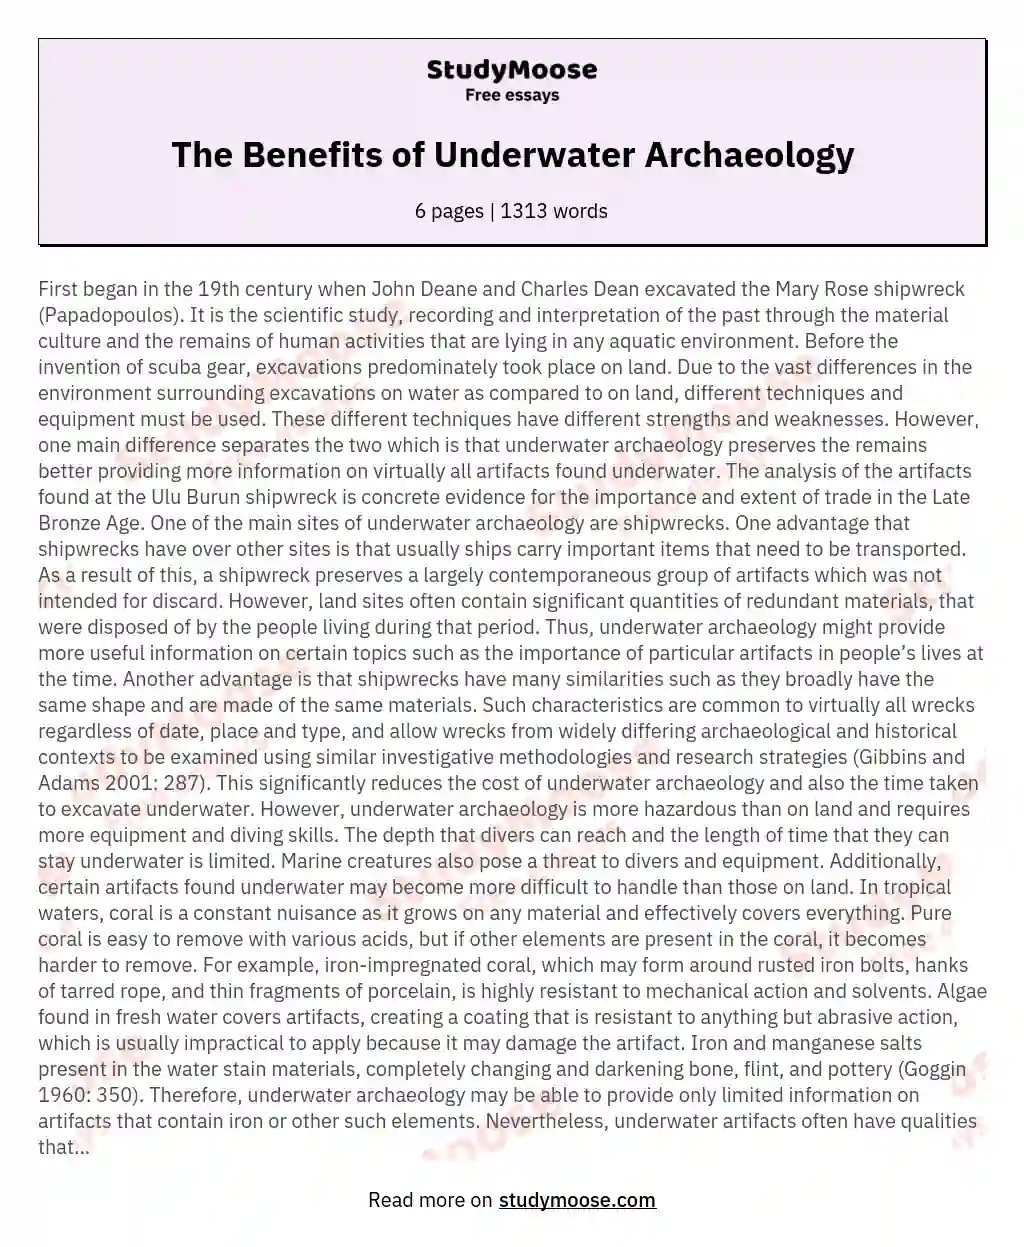 The Benefits of Underwater Archaeology